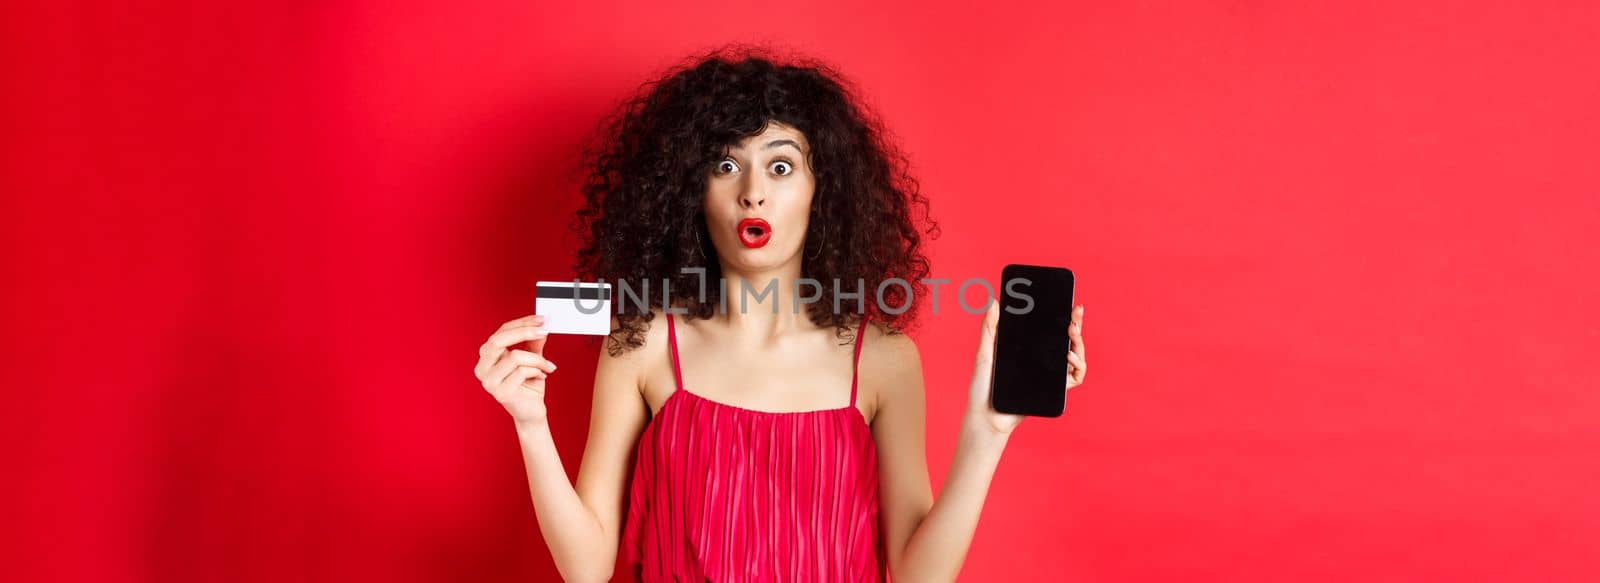 Online shopping concept. Beautiful woman in red dress and lipstick, showing empty phone screen and plastic credit card, standing on studio background.